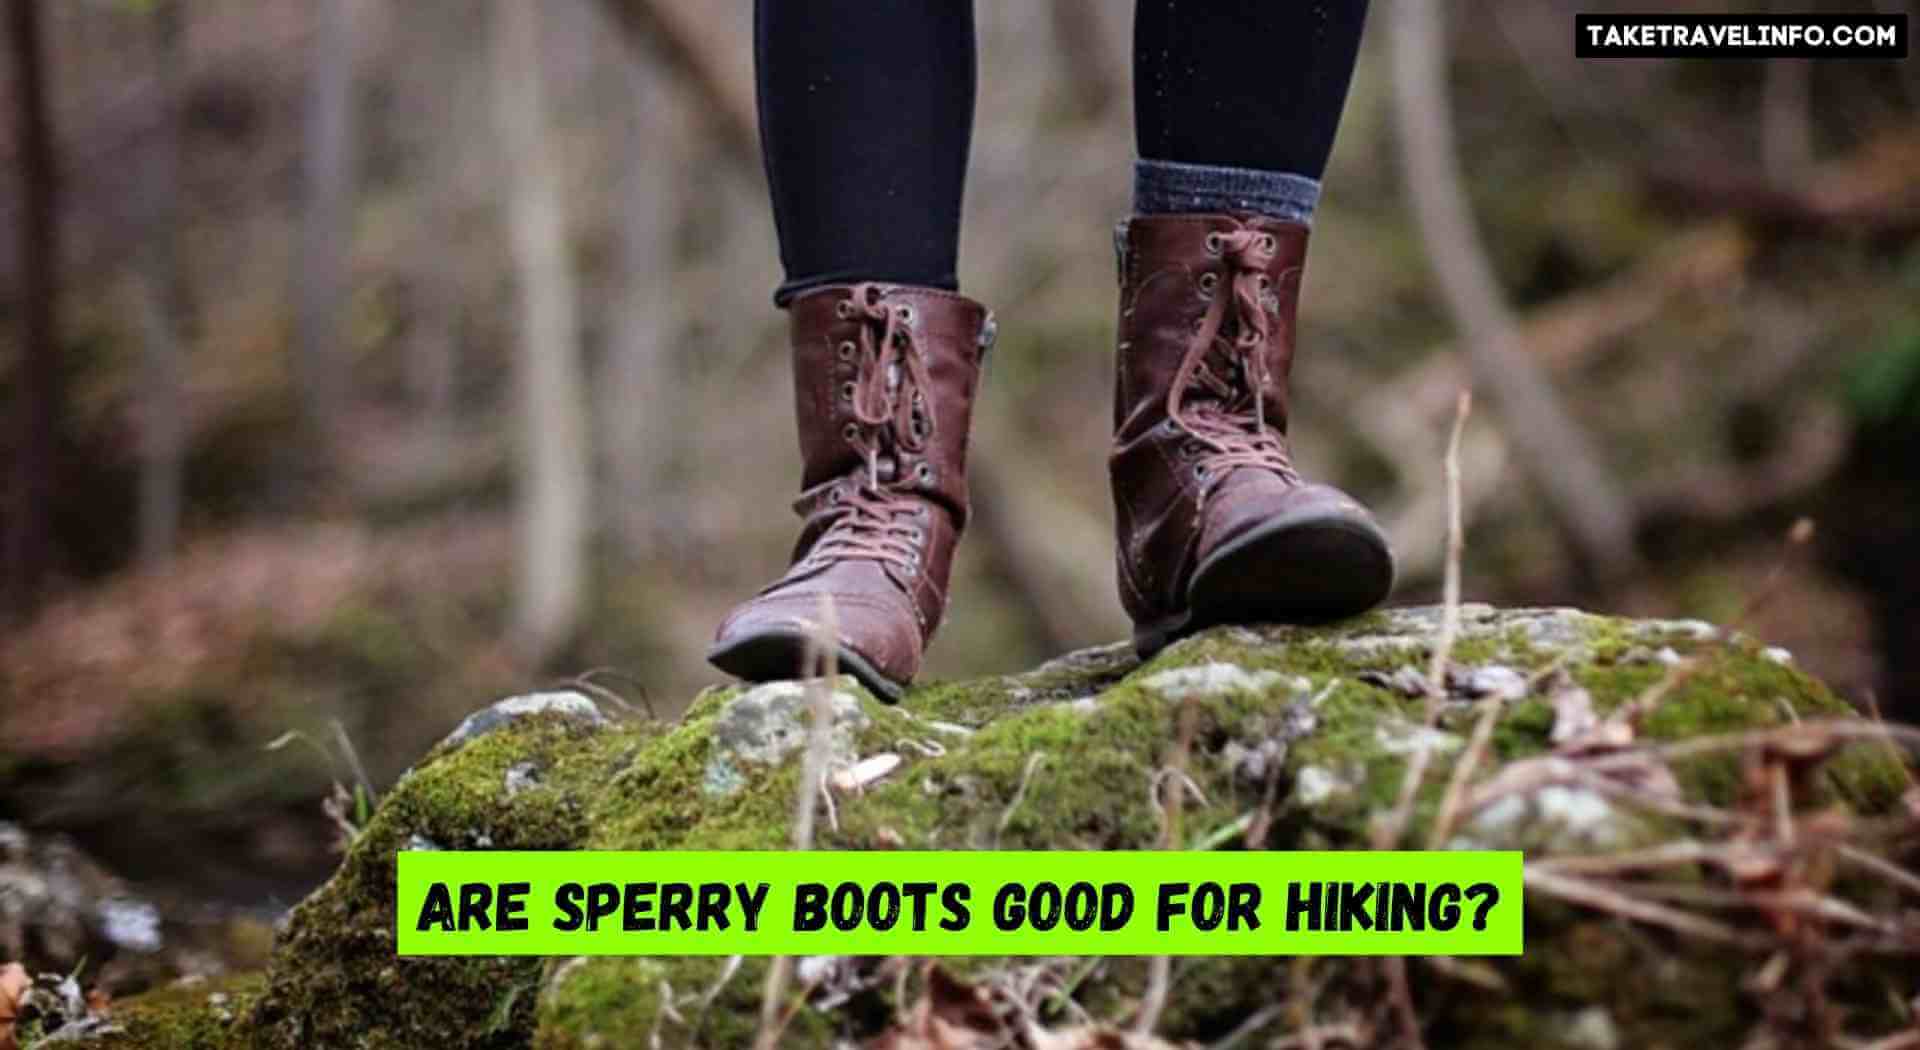 Are Sperry Boots Good for Hiking